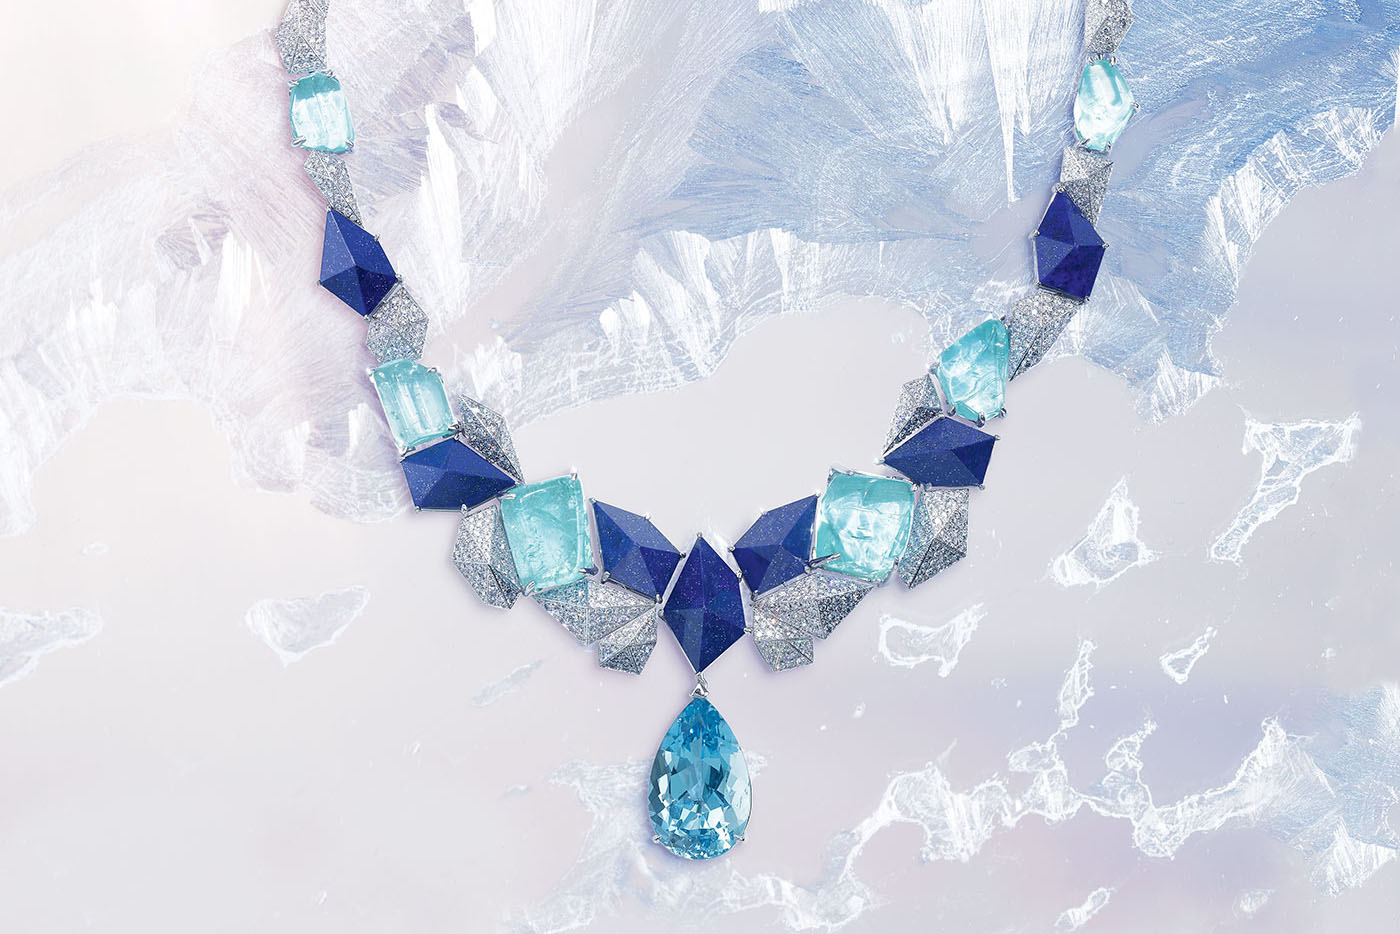 Piaget ‘Infinite Blue’ transformable necklace from the ‘Sunlight Escape’ collection with 14.52ct pear cut aquamarine, 67.34ct of Paraiba tourmalines, lapis lazuli and diamonds